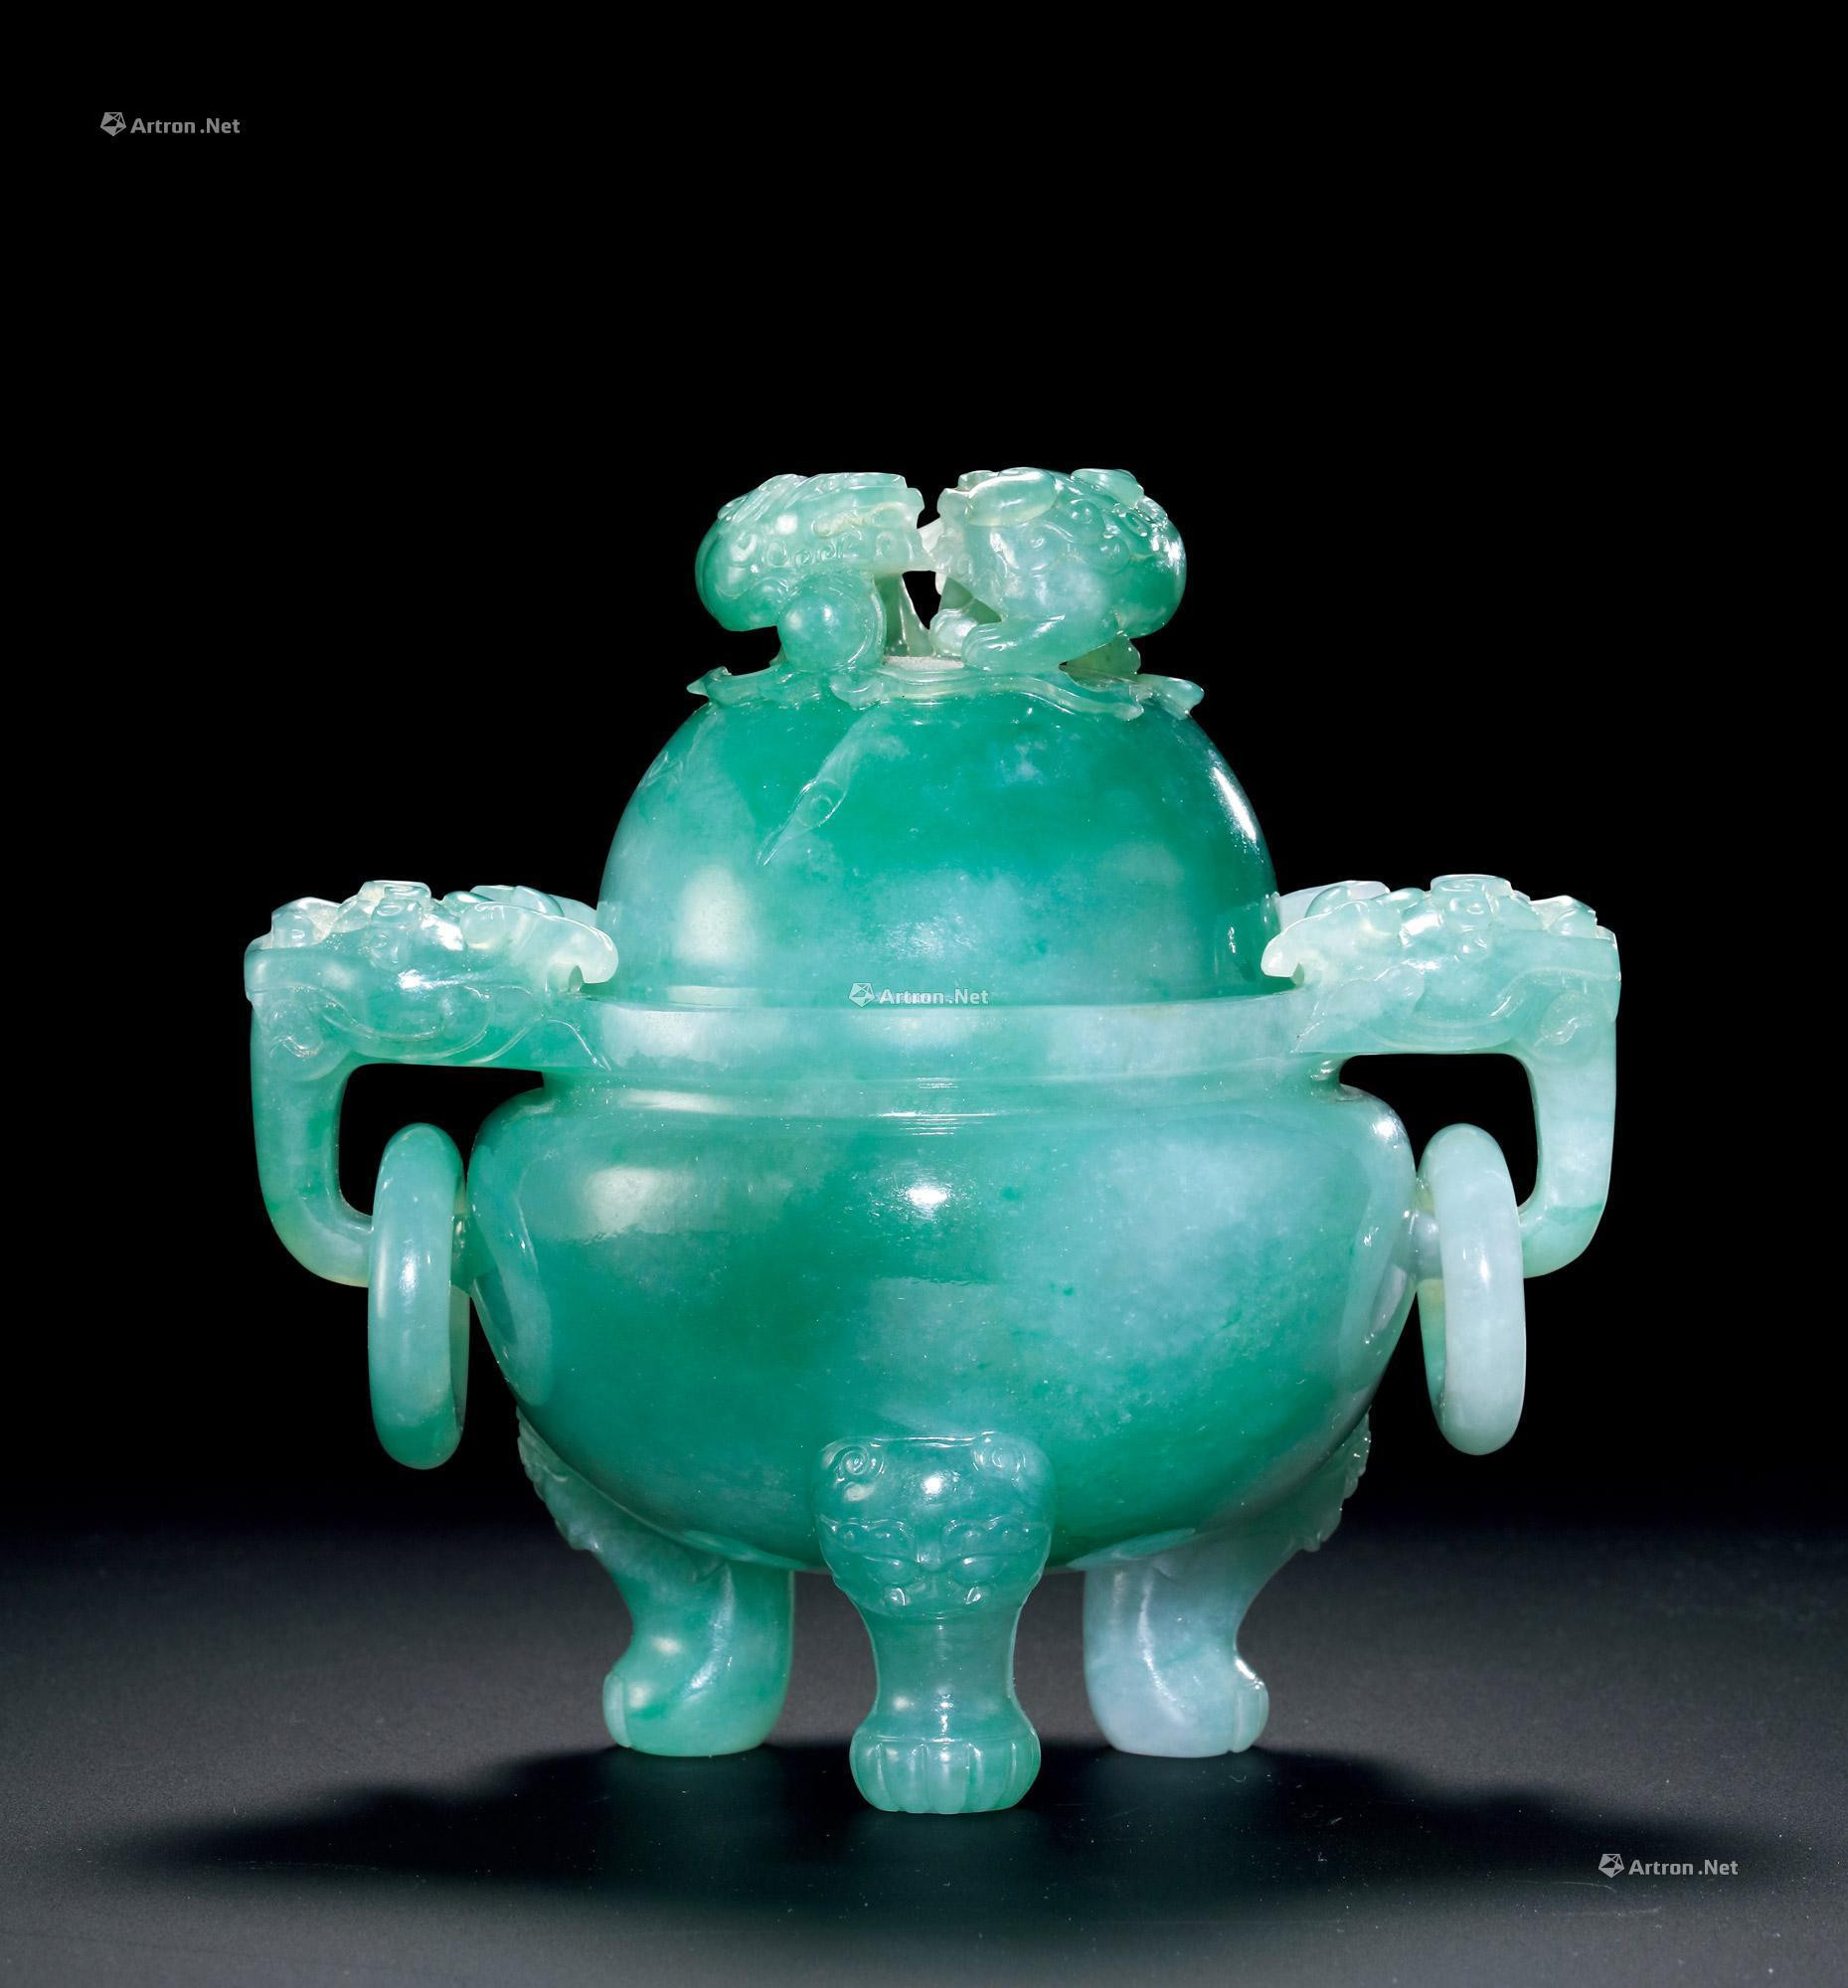 AN EXCEPTIONAL JADITE CENSER WITH LION KNOB AND HANDLES